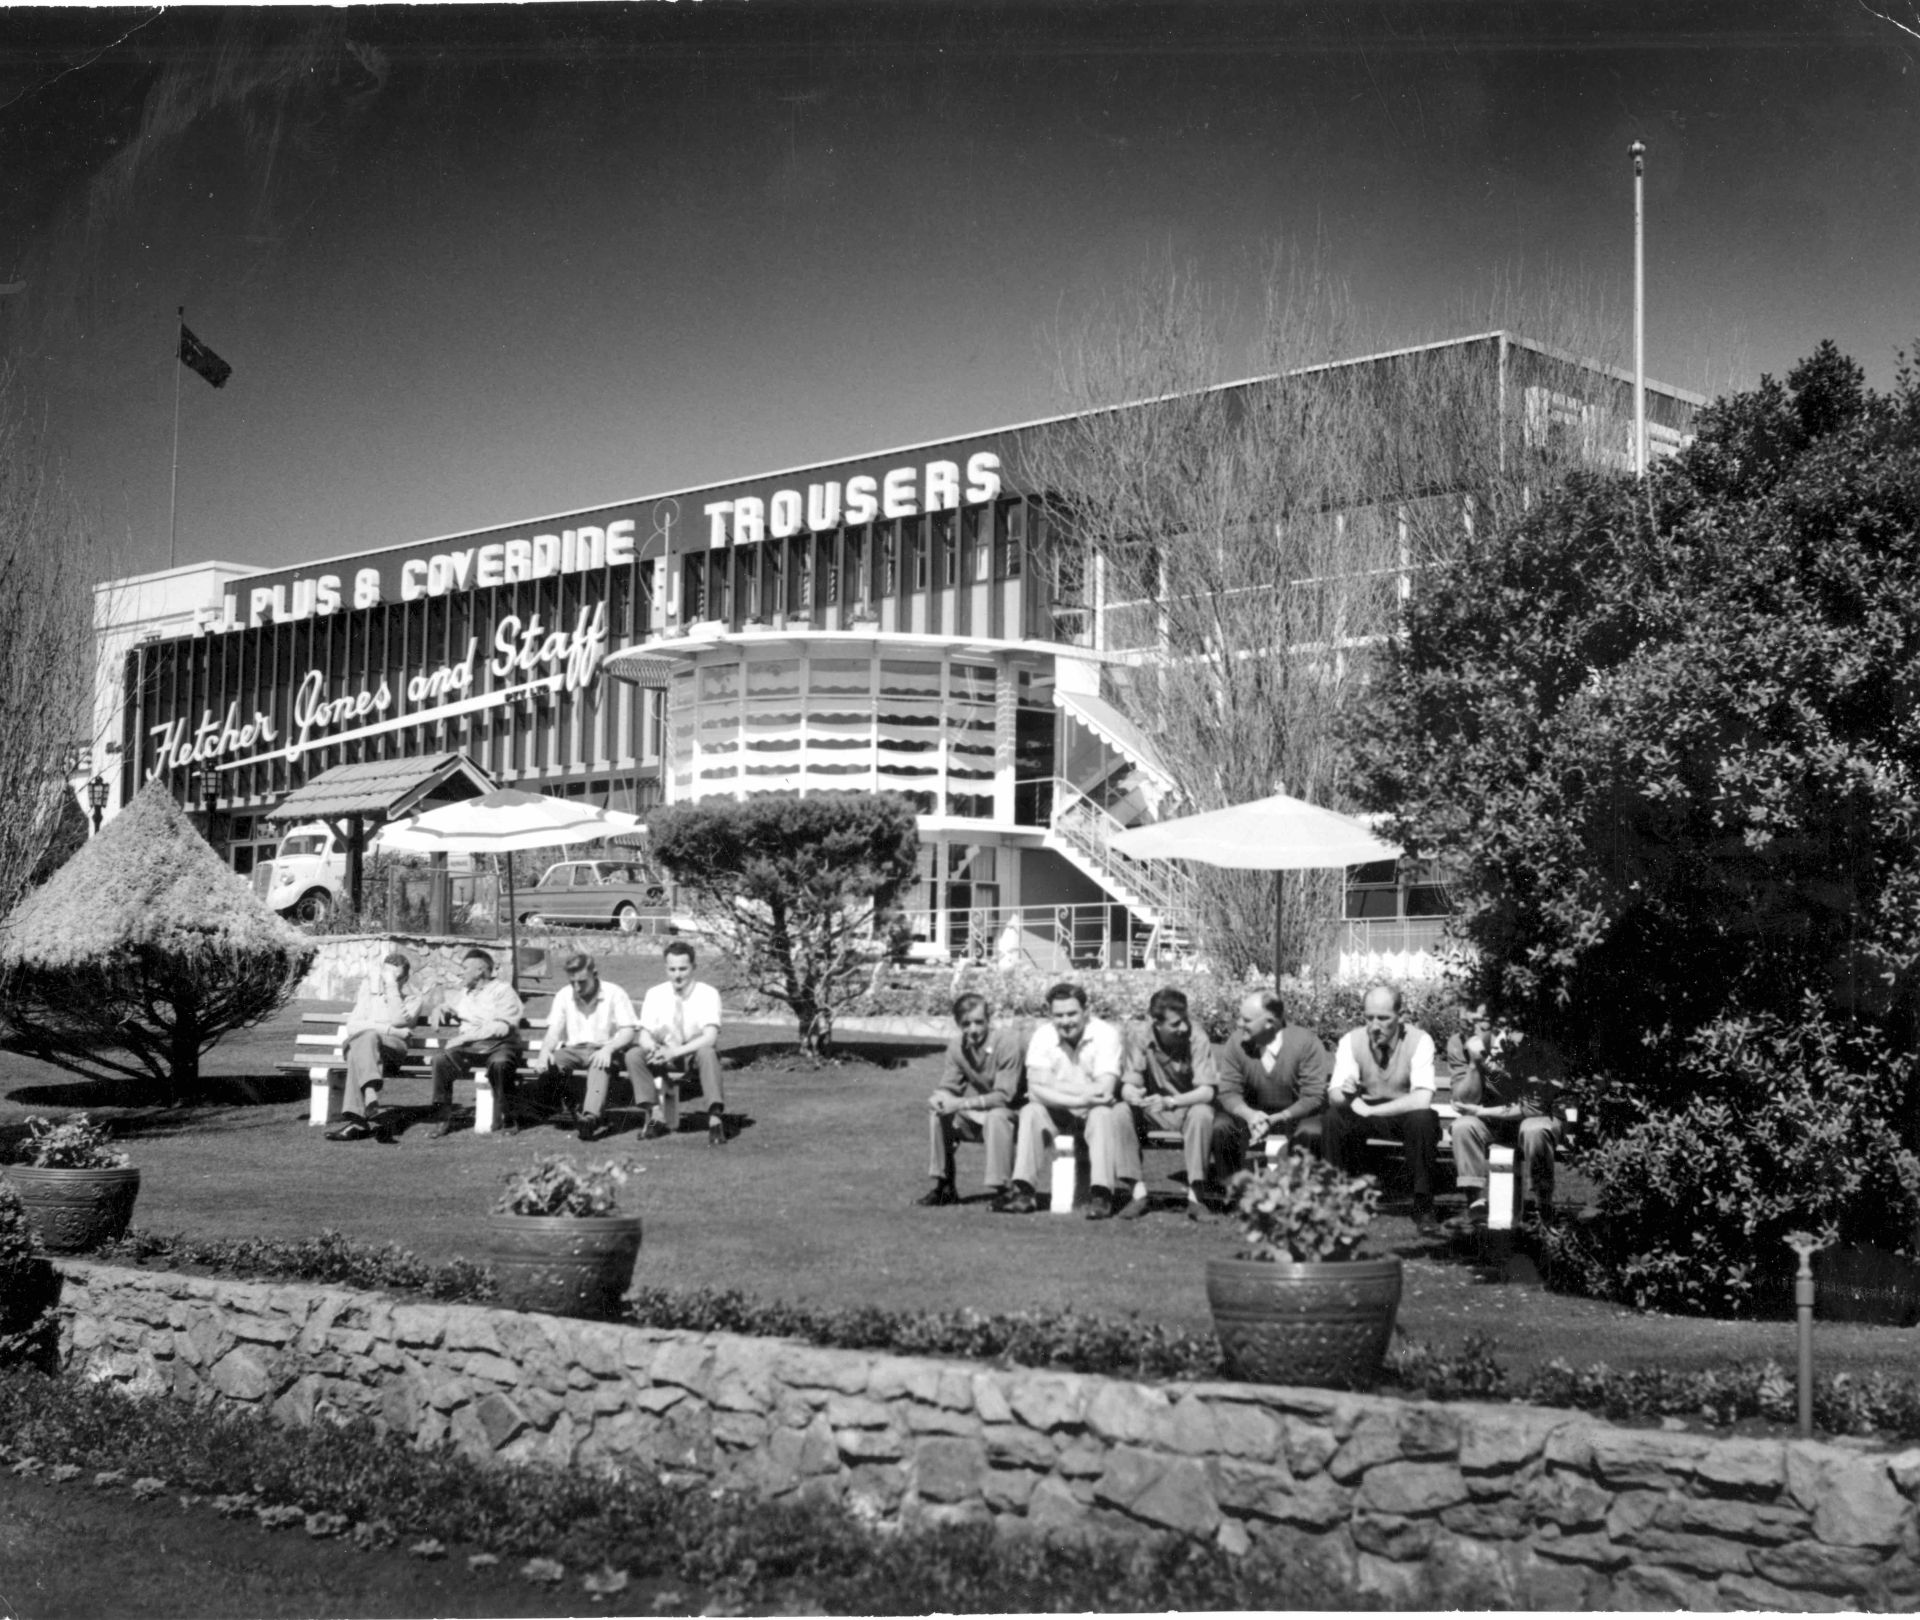 Workers enjoying the gardens at lunchtime 1962.  Photo: Jones Family Collection